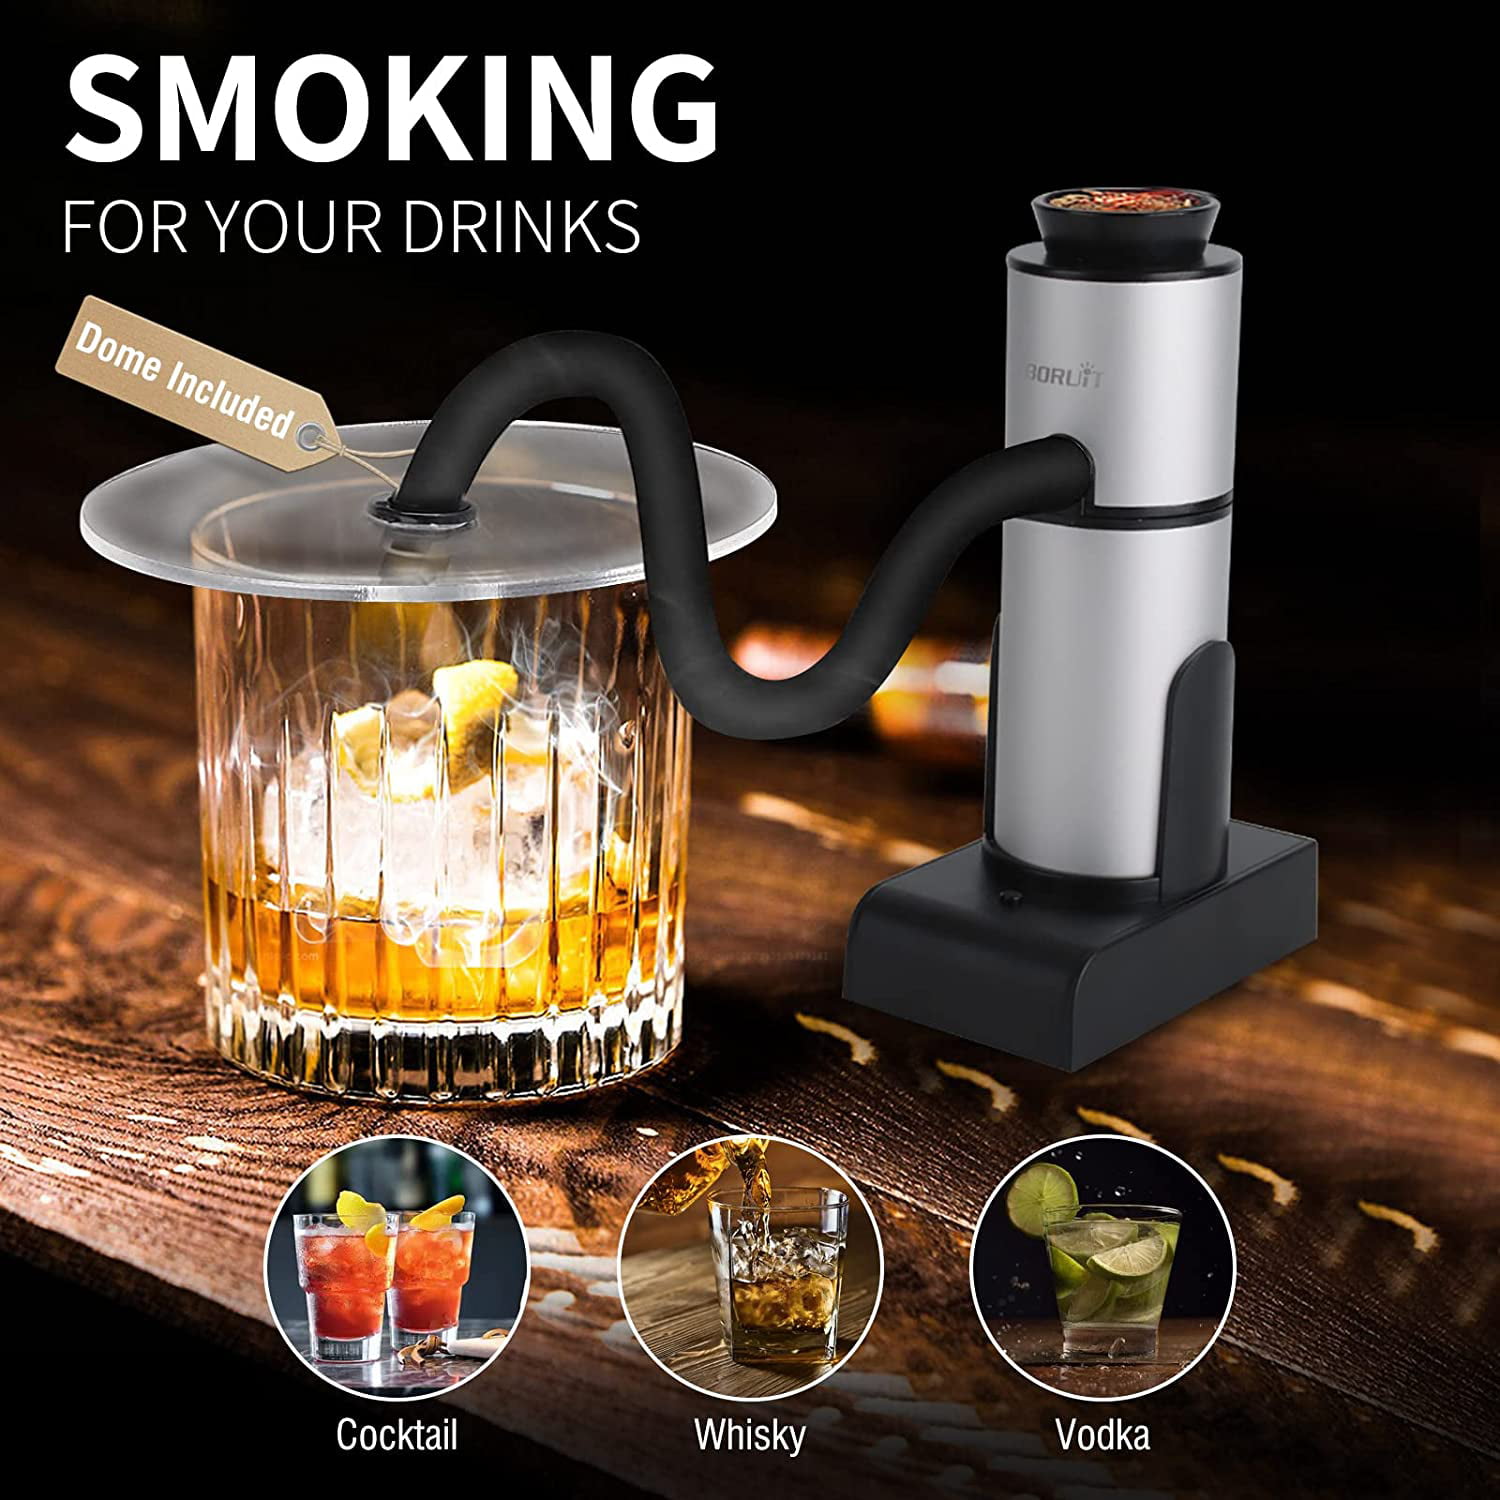 Cocktail & Food Smoker 2-in-1 Kit - Drink Smoker with Wood Chips & Accessories, Smoke Infuser | Smoking Gun for Meat, Drinks, BBQ, Cheese, Veggies 